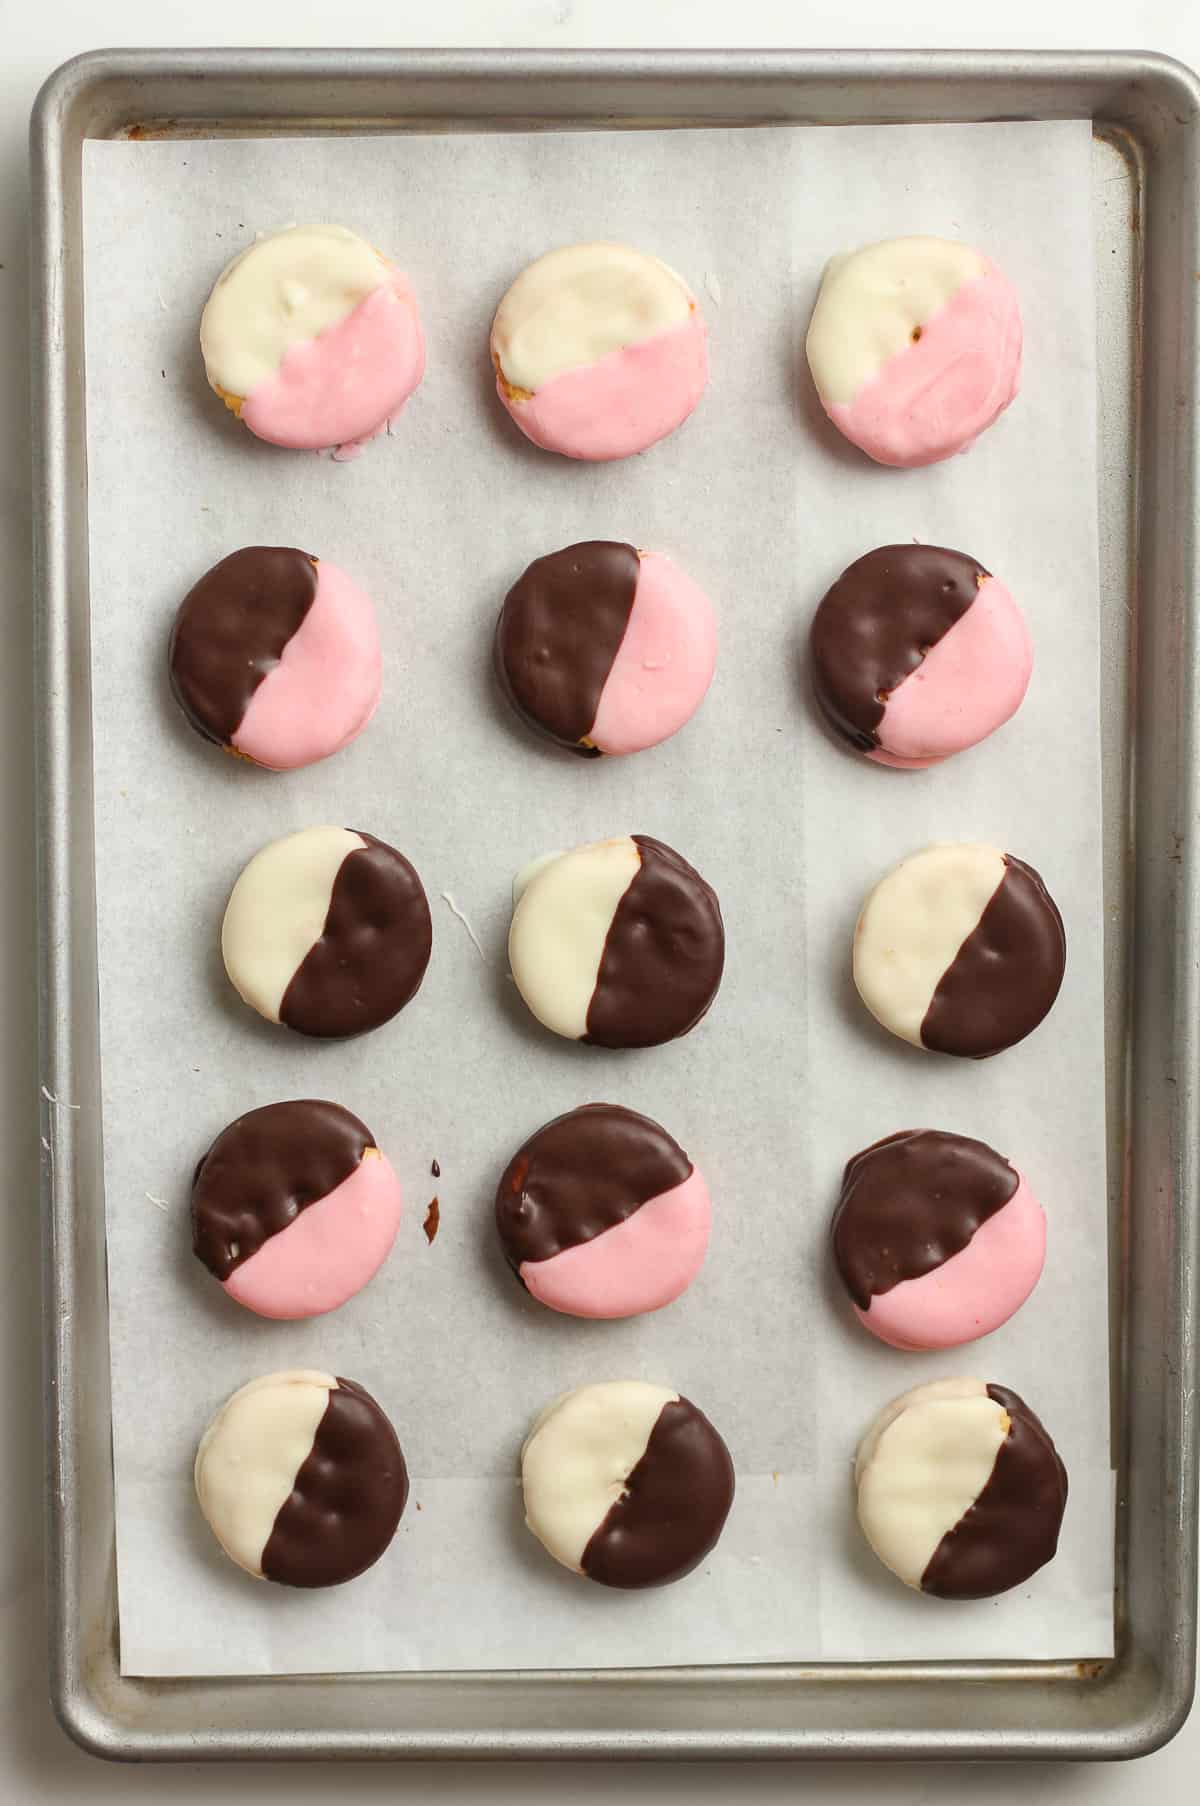 A pan of pink, white, and black cookies.